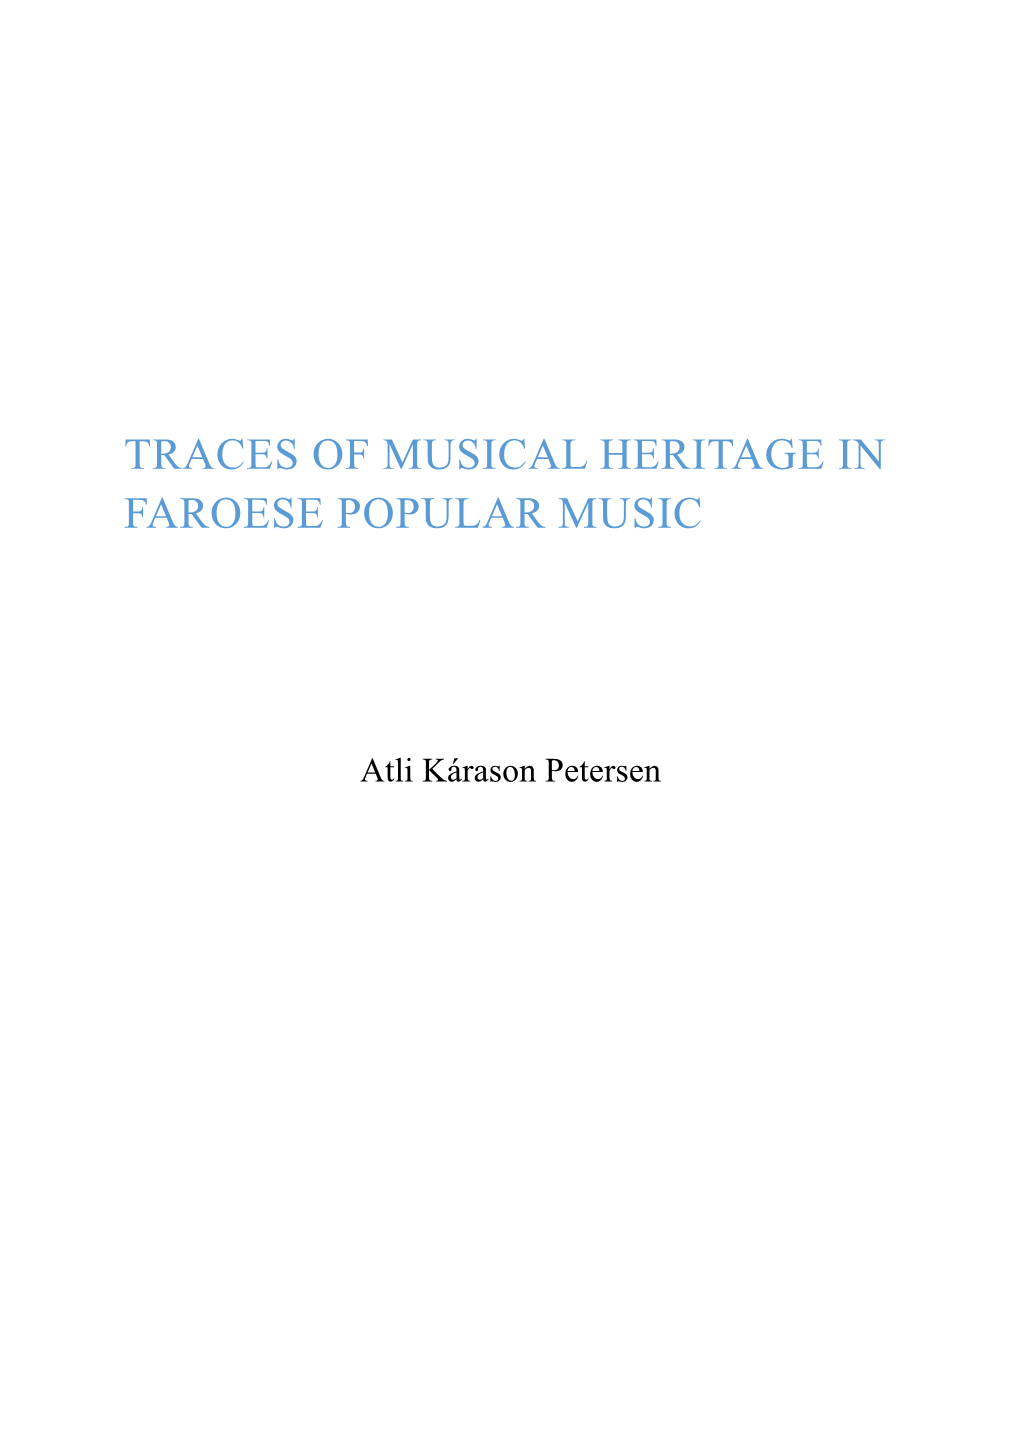 Traces of Musical Heritage in Faroese Popular Music